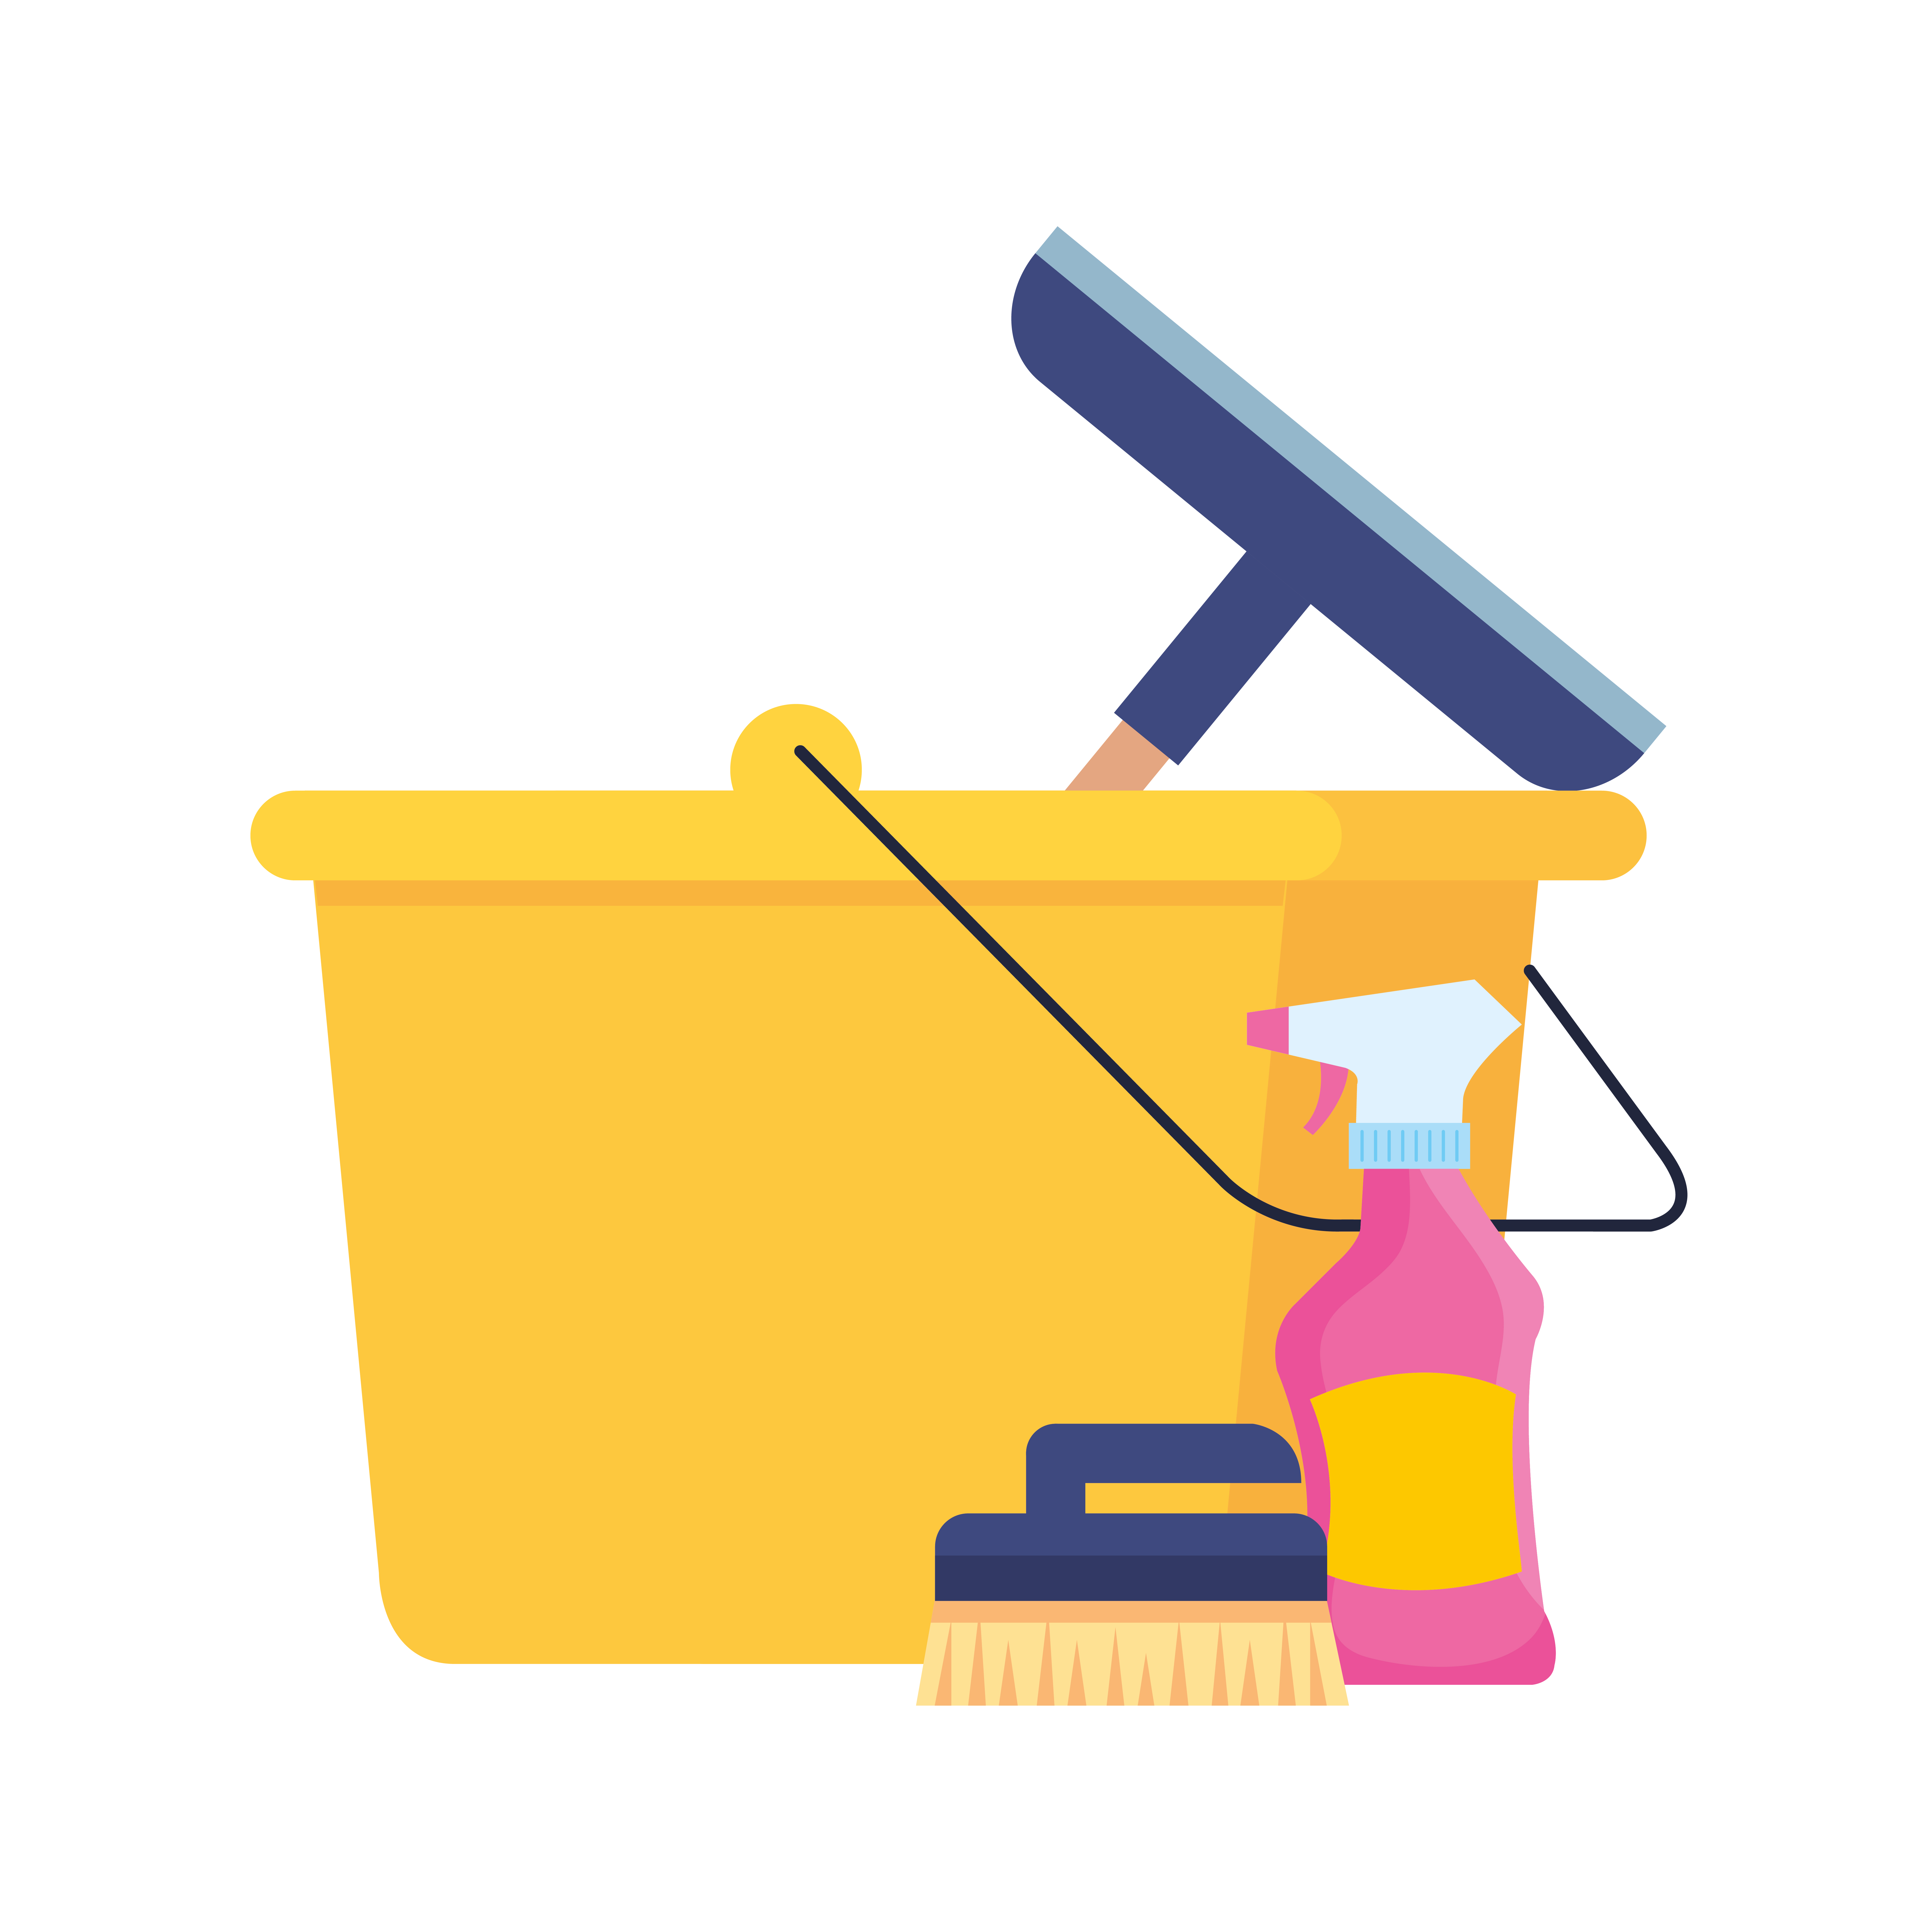 610 Cleaning Tools Photos, Pictures And Background Images For Free Download  - Pngtree